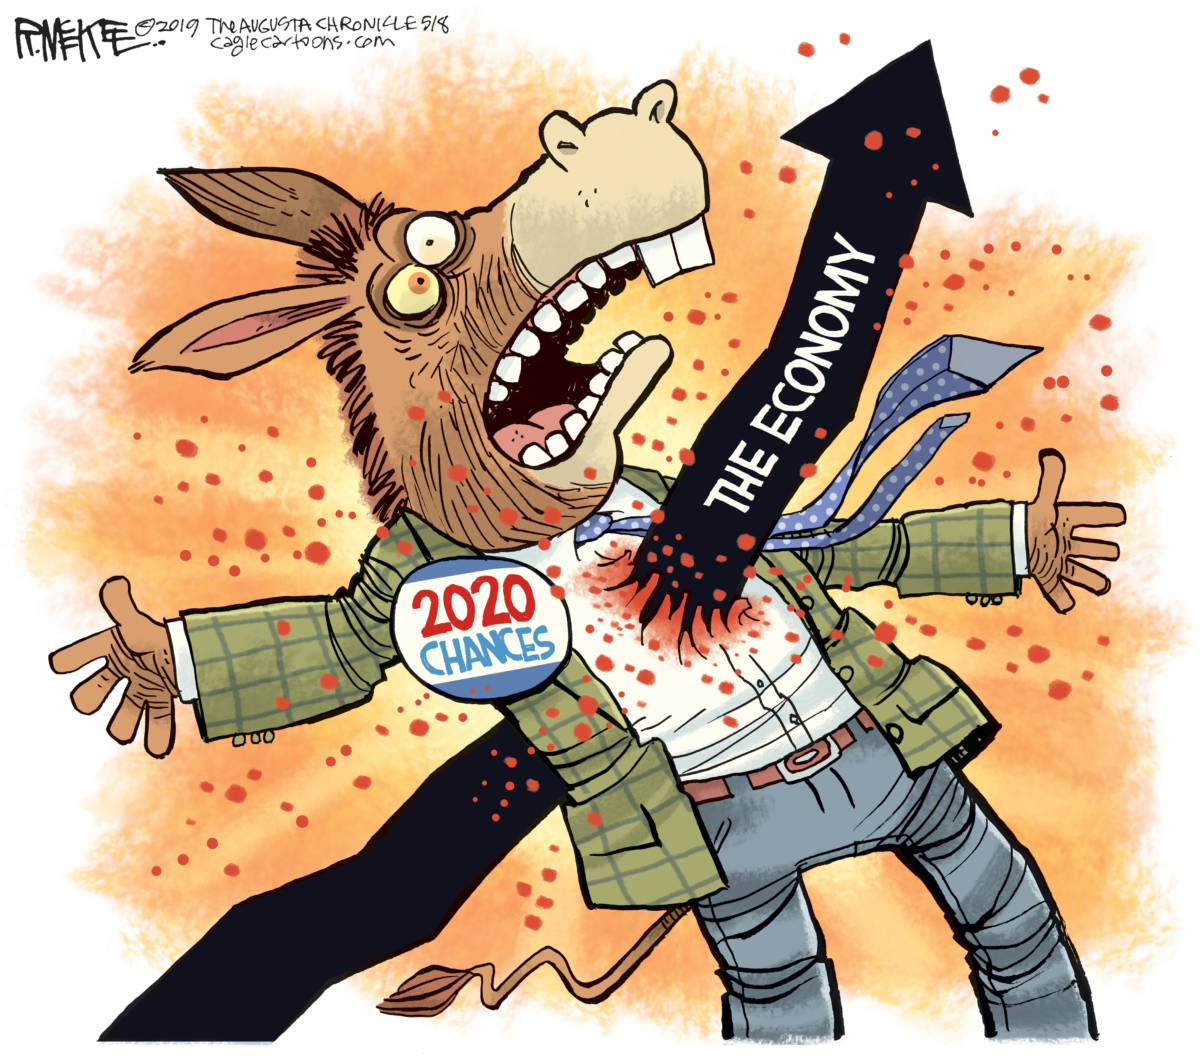 Economy and 2020 Dems, Rick McKee, economy, election 2020, Democrats, socialism, Trump, jobs, unemployment, southern Utah, Utah, St. George, The Independent,